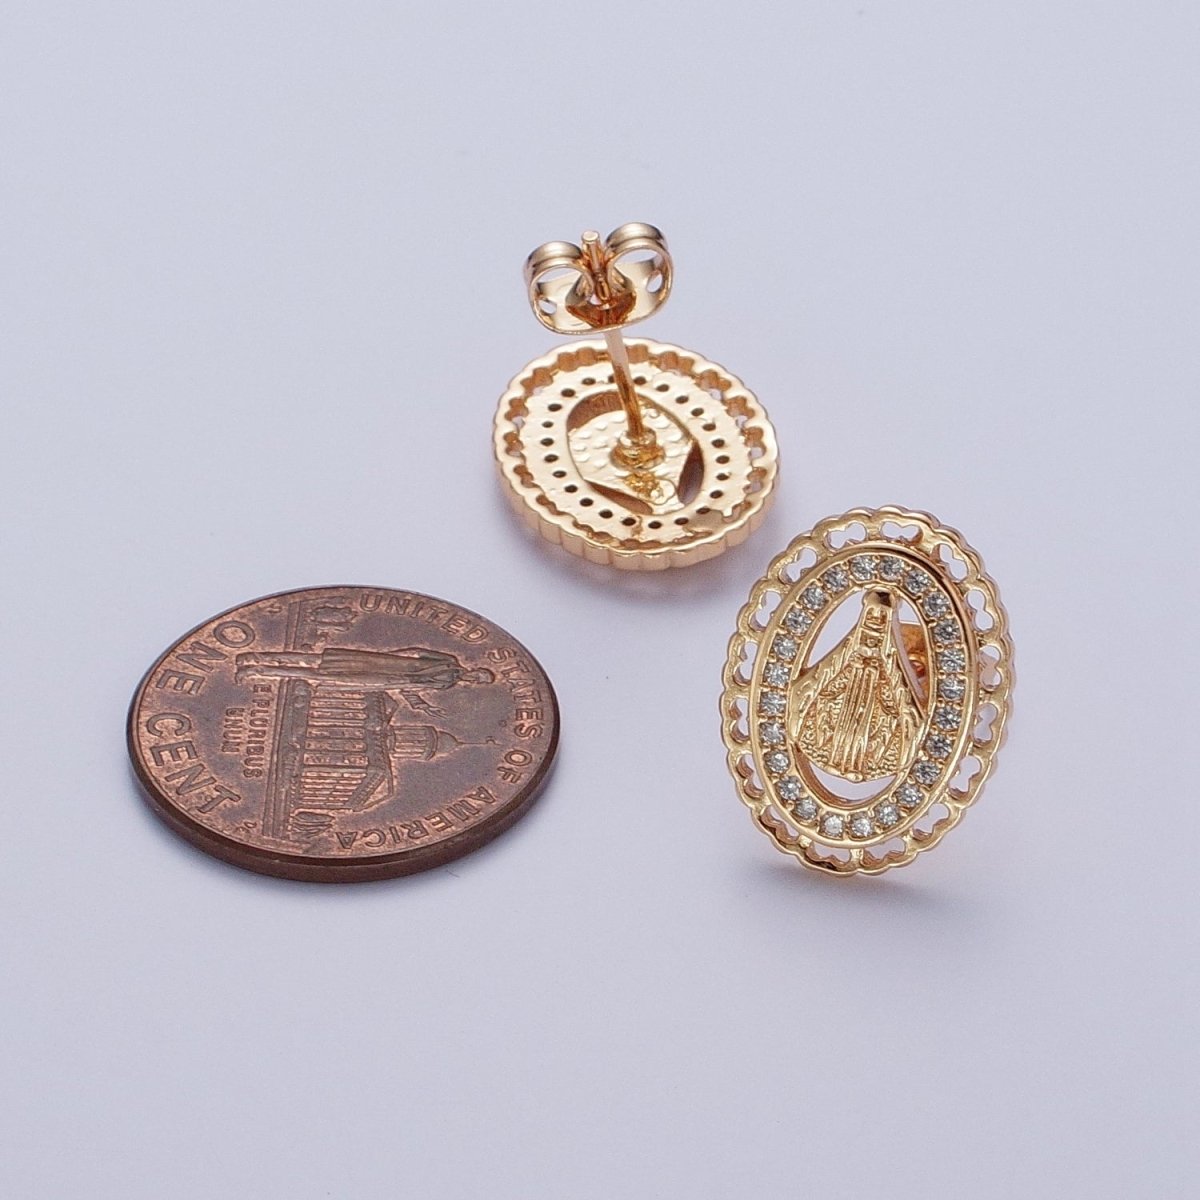 Vintage Miraculous Lady Earring Gold Lady Guadalupe Stud Earring Oval Medallion Virgin Mary Religious Jewelry Gift AE-1047 - DLUXCA